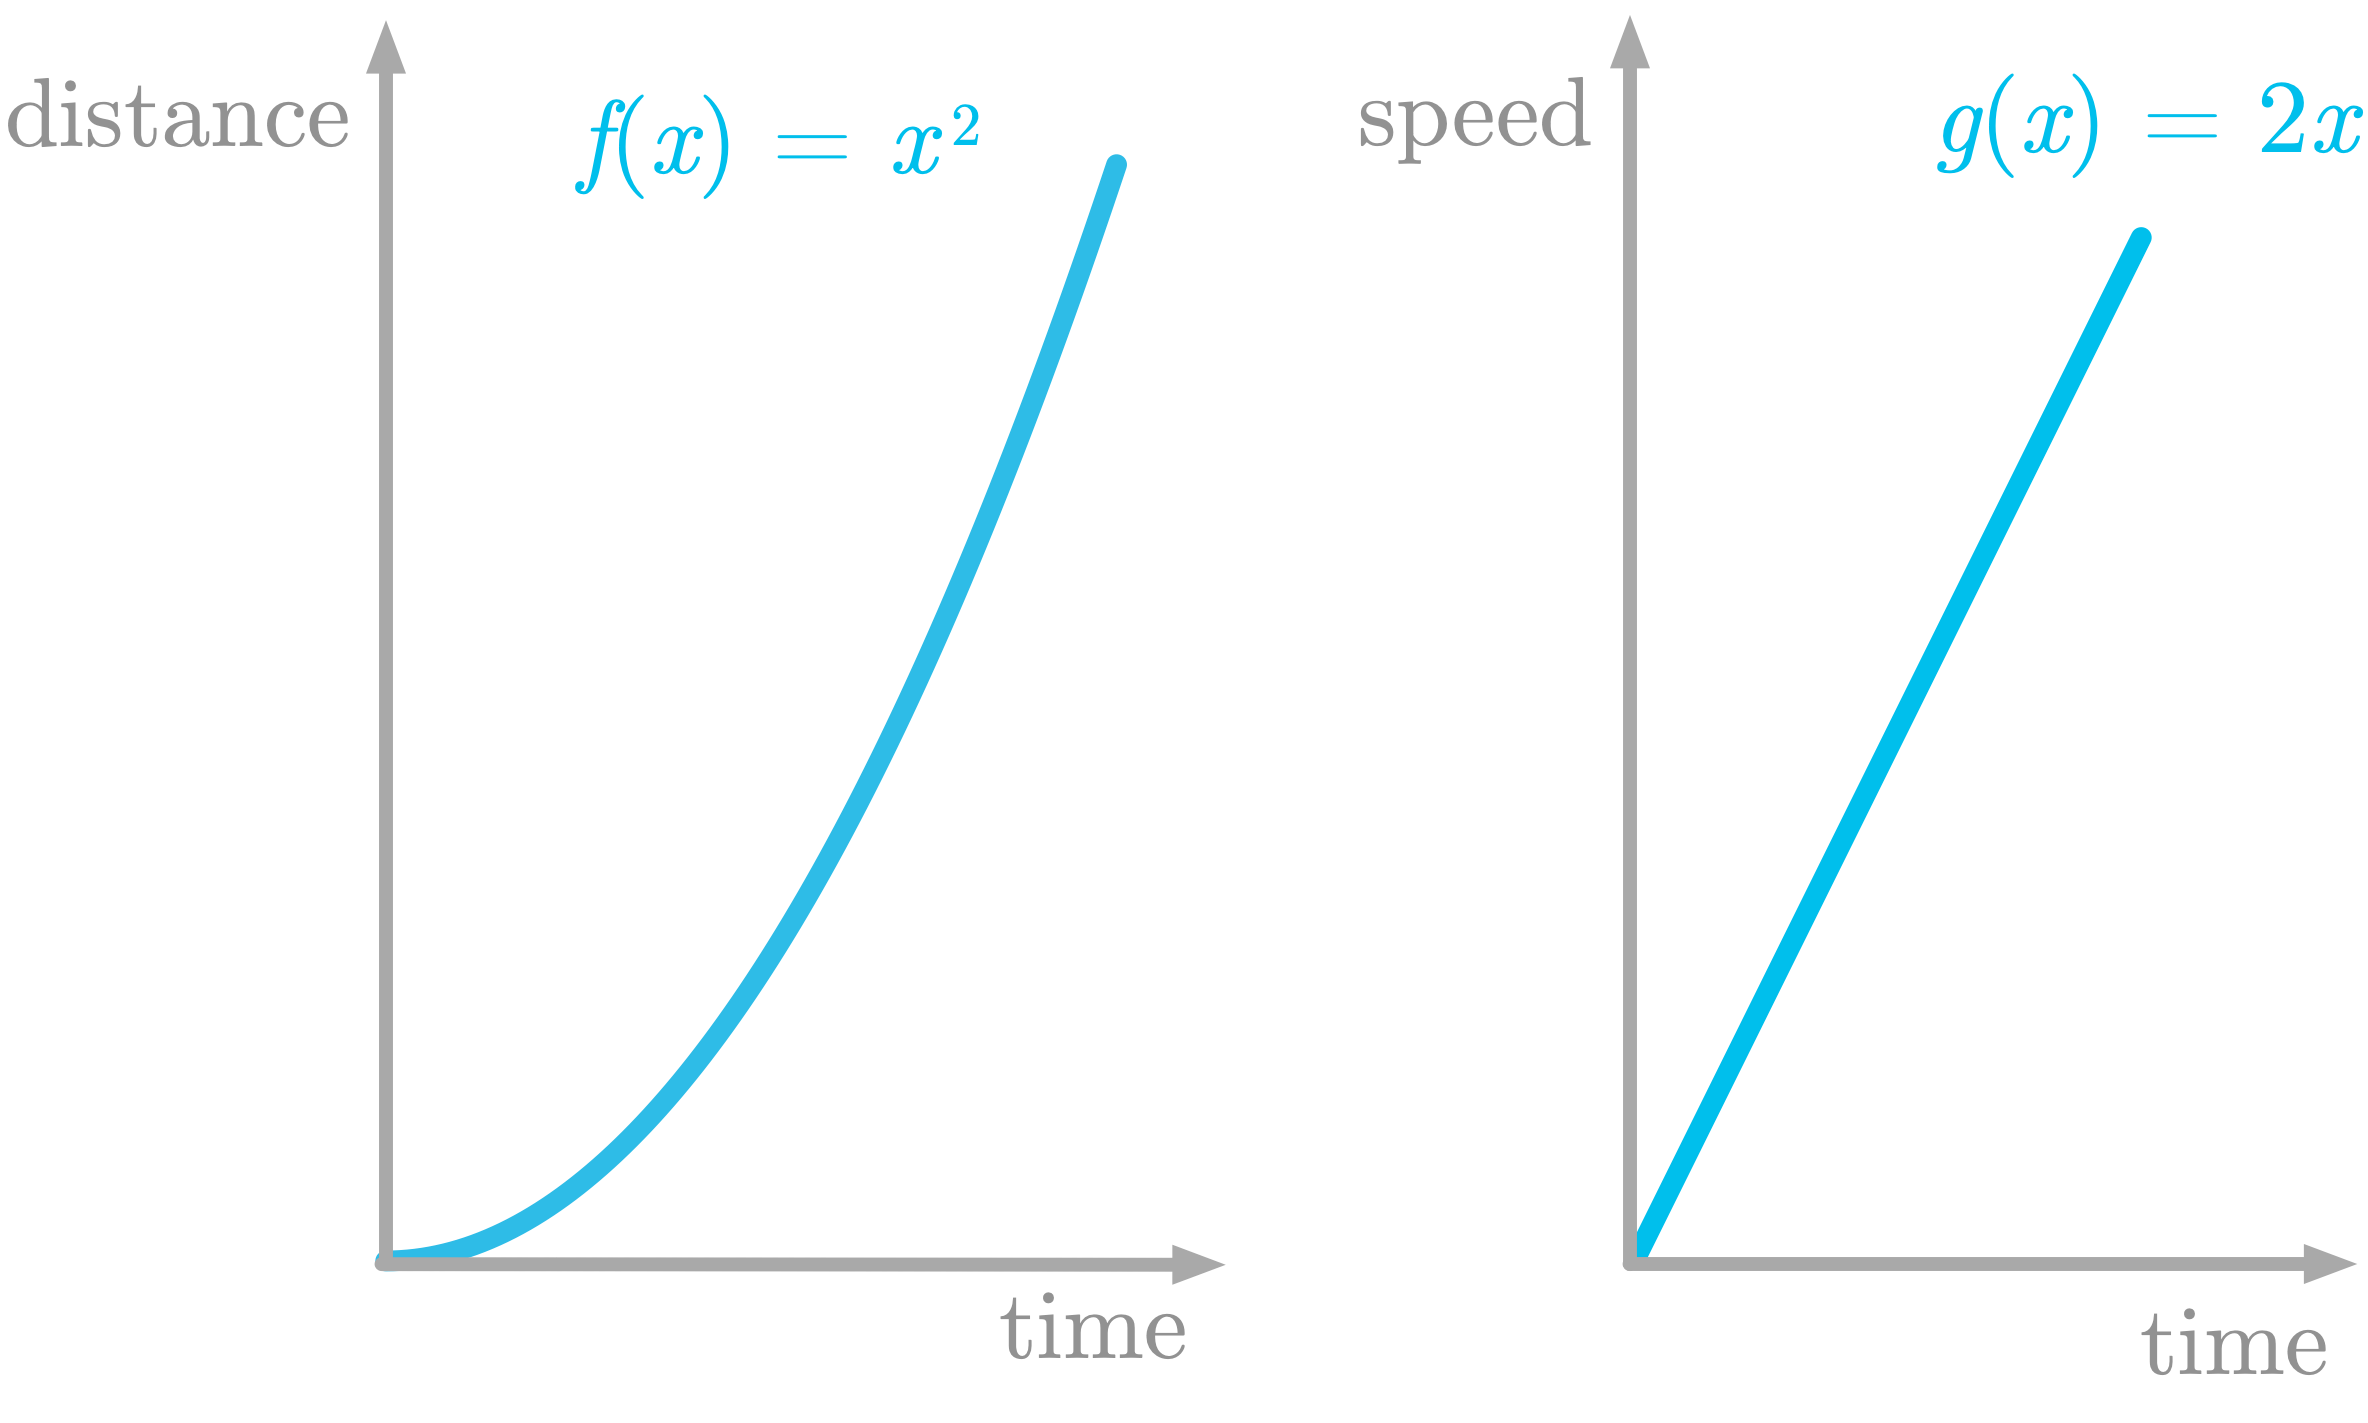 Figure 6: The left panel shows $f(x)$ which is the distance as a function of time, and the right panel its derivative $g(x)$, which is the speed as a function of time.